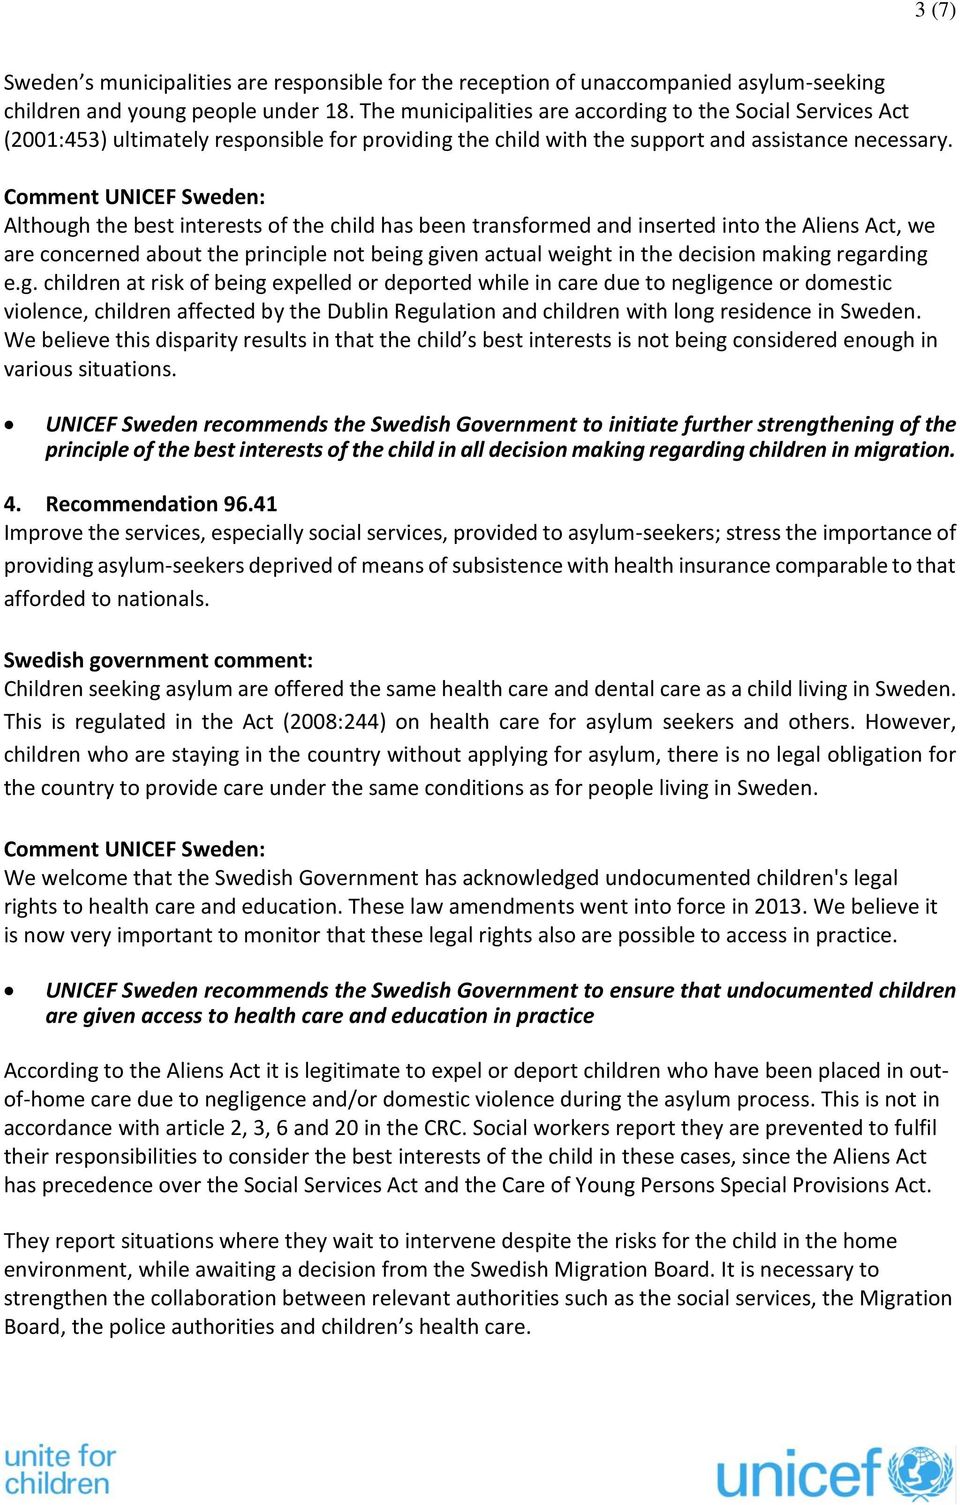 Although the best interests of the child has been transformed and inserted into the Aliens Act, we are concerned about the principle not being given actual weight in the decision making regarding e.g. children at risk of being expelled or deported while in care due to negligence or domestic violence, children affected by the Dublin Regulation and children with long residence in Sweden.